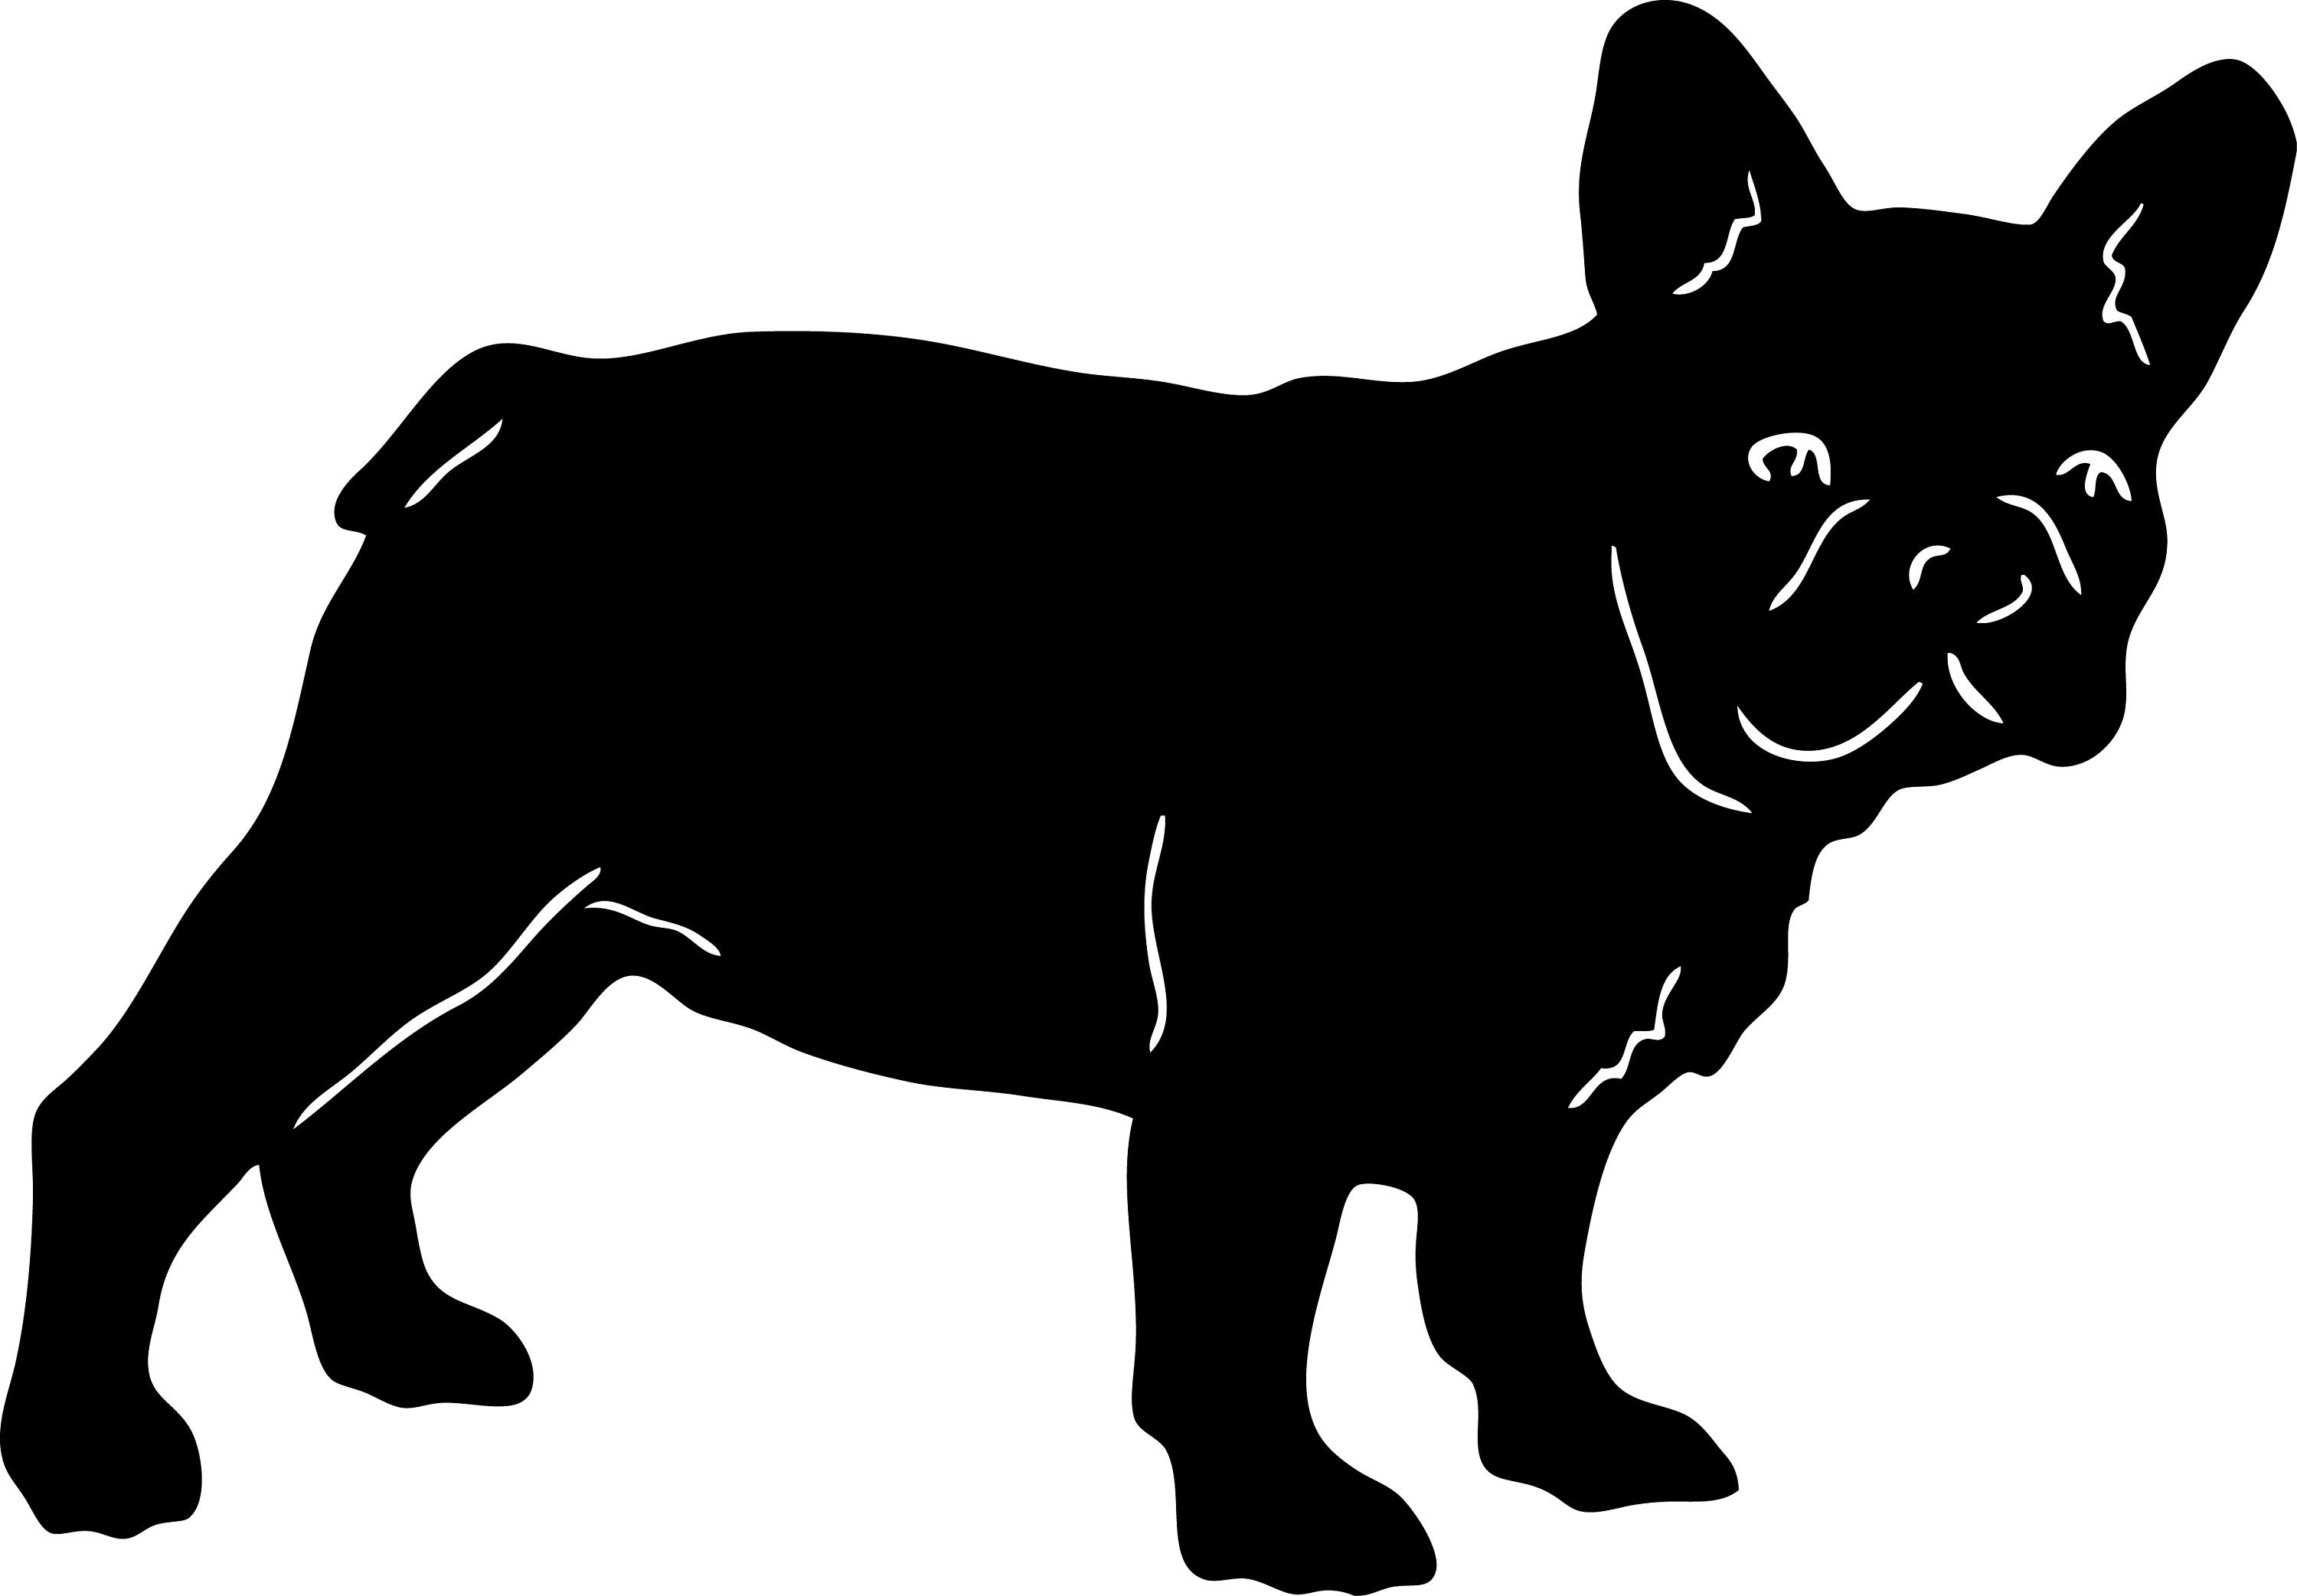 French Bulldog Vinyl Decals Stickers-Five Variations | Etsy